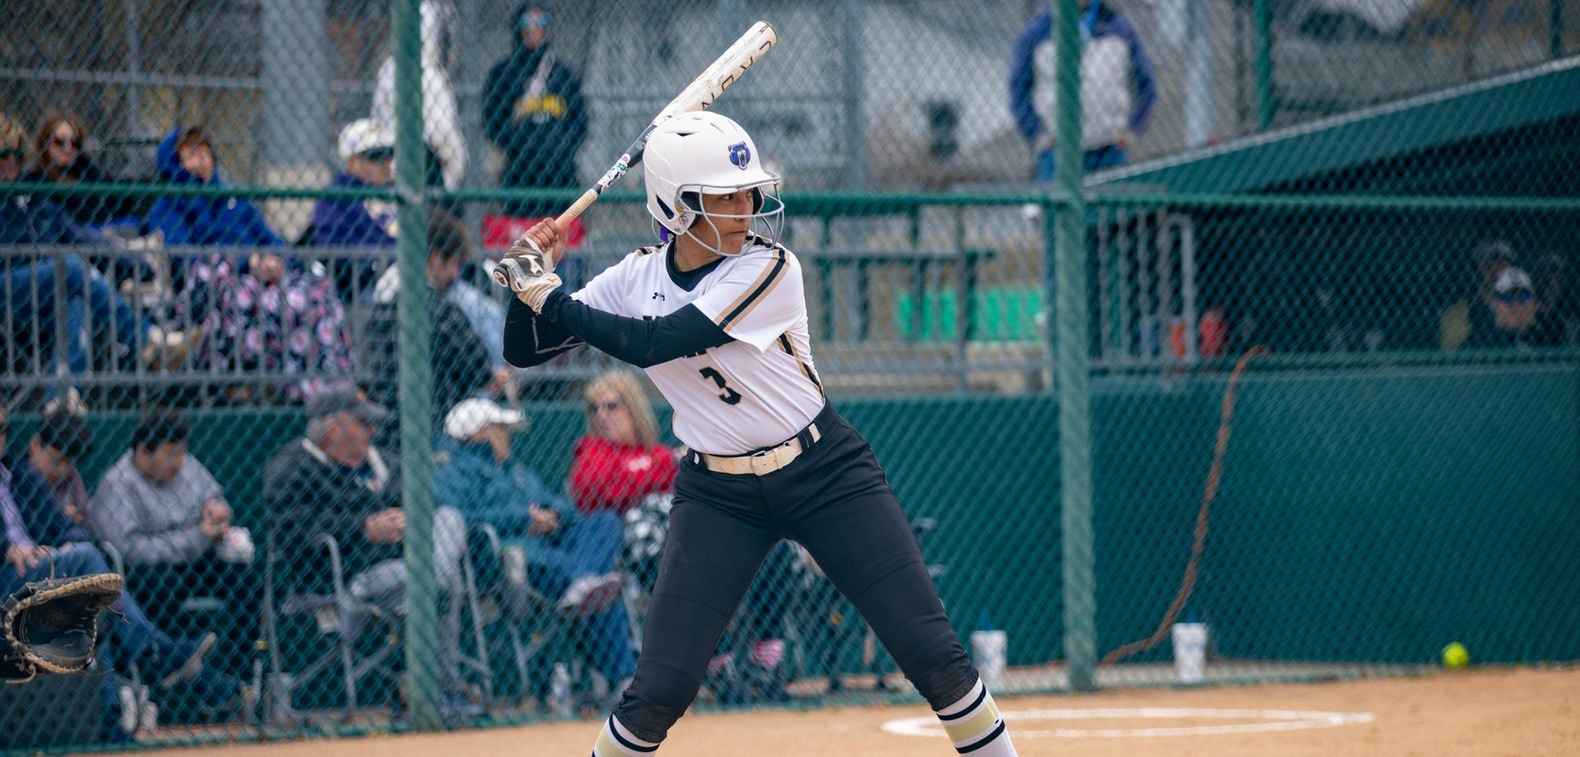 Breanne McMurtry went 2-for-3 with a double and two RBIs to lead the Bruin offense.